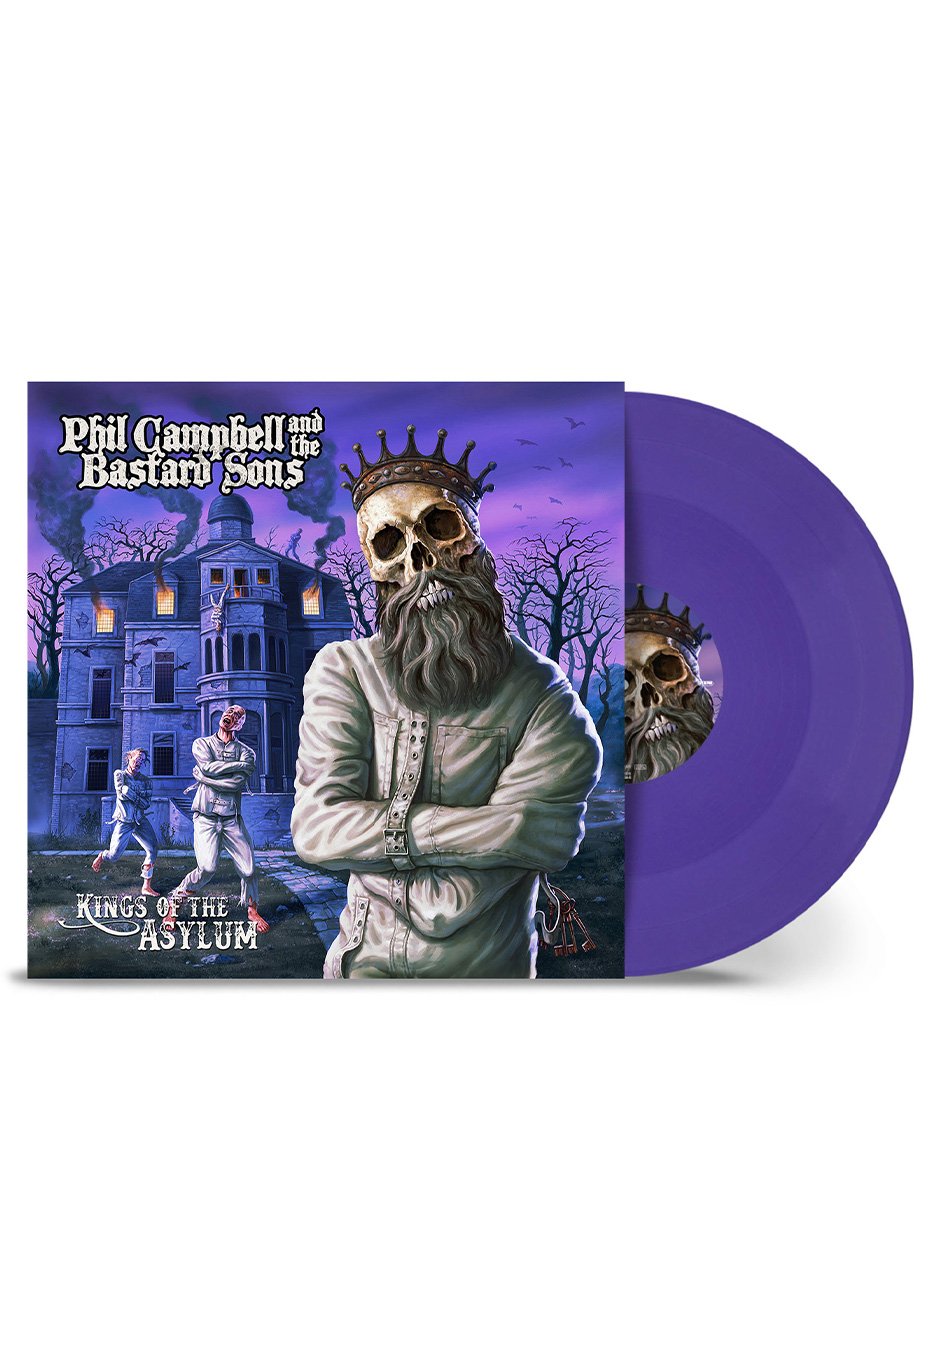 Phil Campbell And The Bastard Sons - Kings Of The Asylum Ltd. Purple - Colored Vinyl